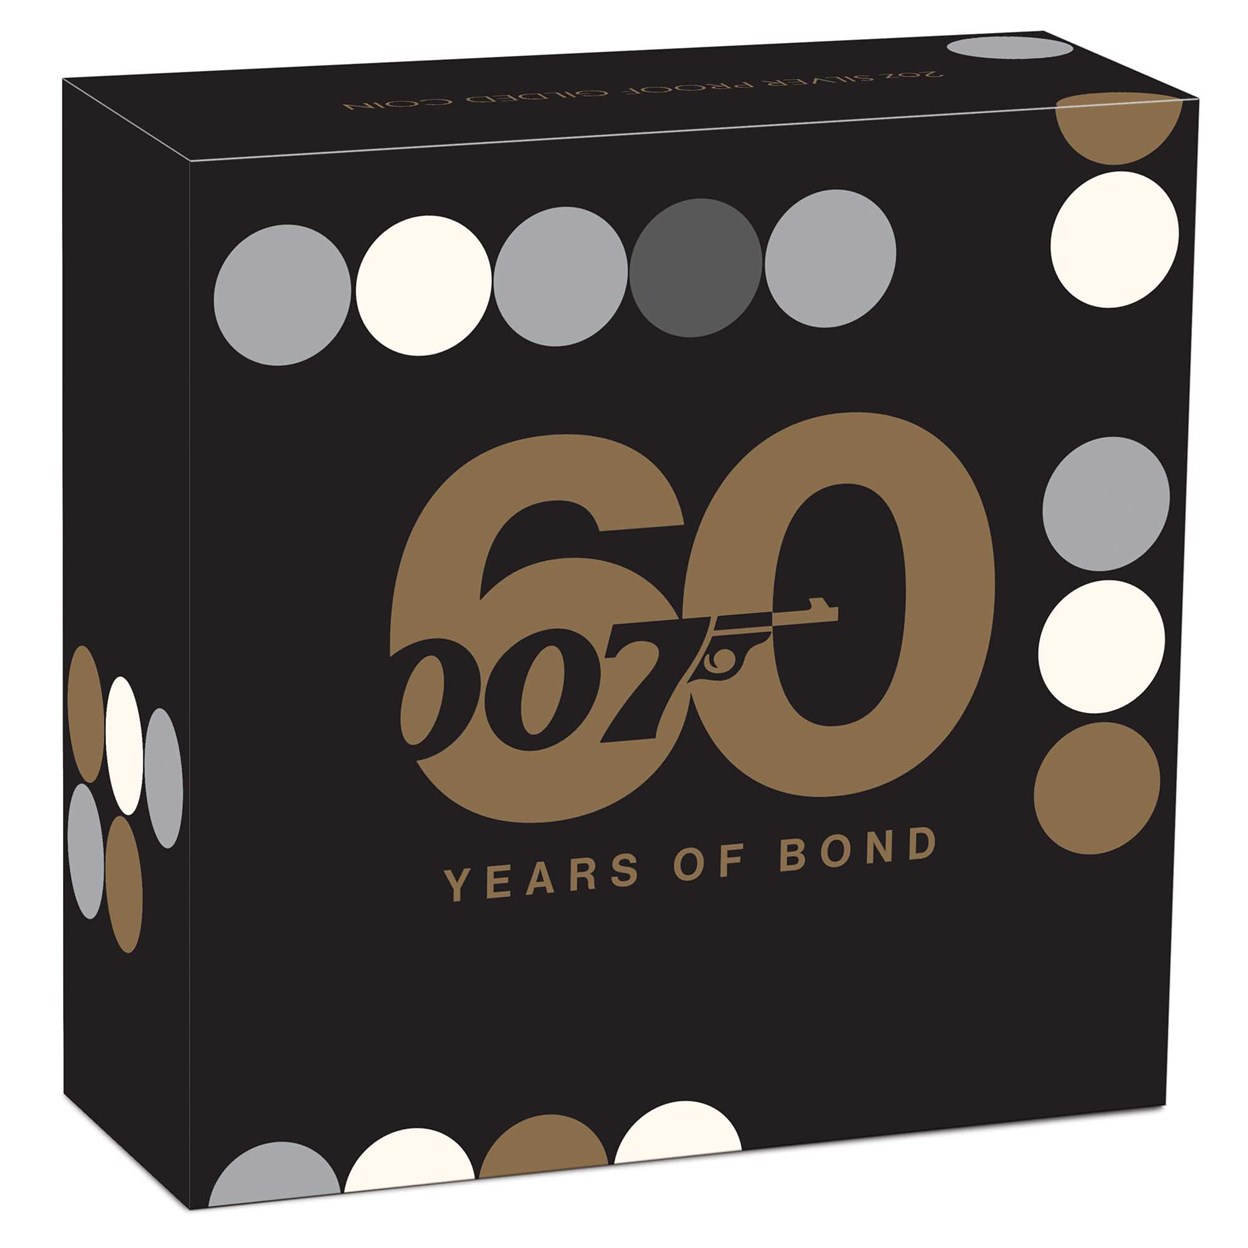 05 2022 60 Years of Bond 2oz Silver Gilded Coin In Shipper HighRes